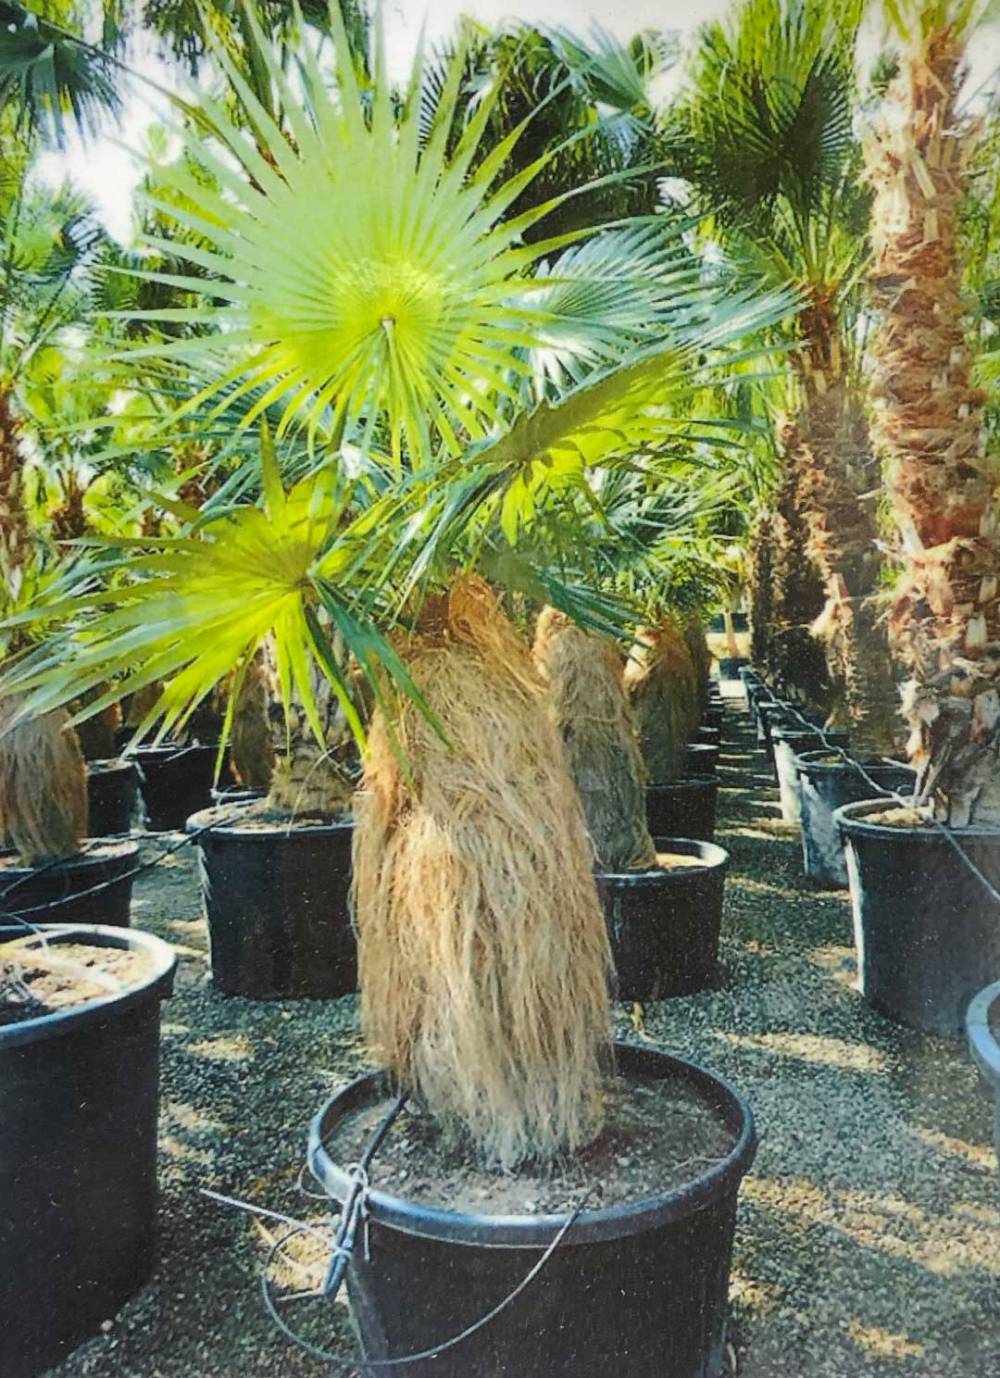 A potted Coccothrinax Crinita (Old Man Palm) with green, circular, pinnate leaves and a trunk draped in long, straw-like strands